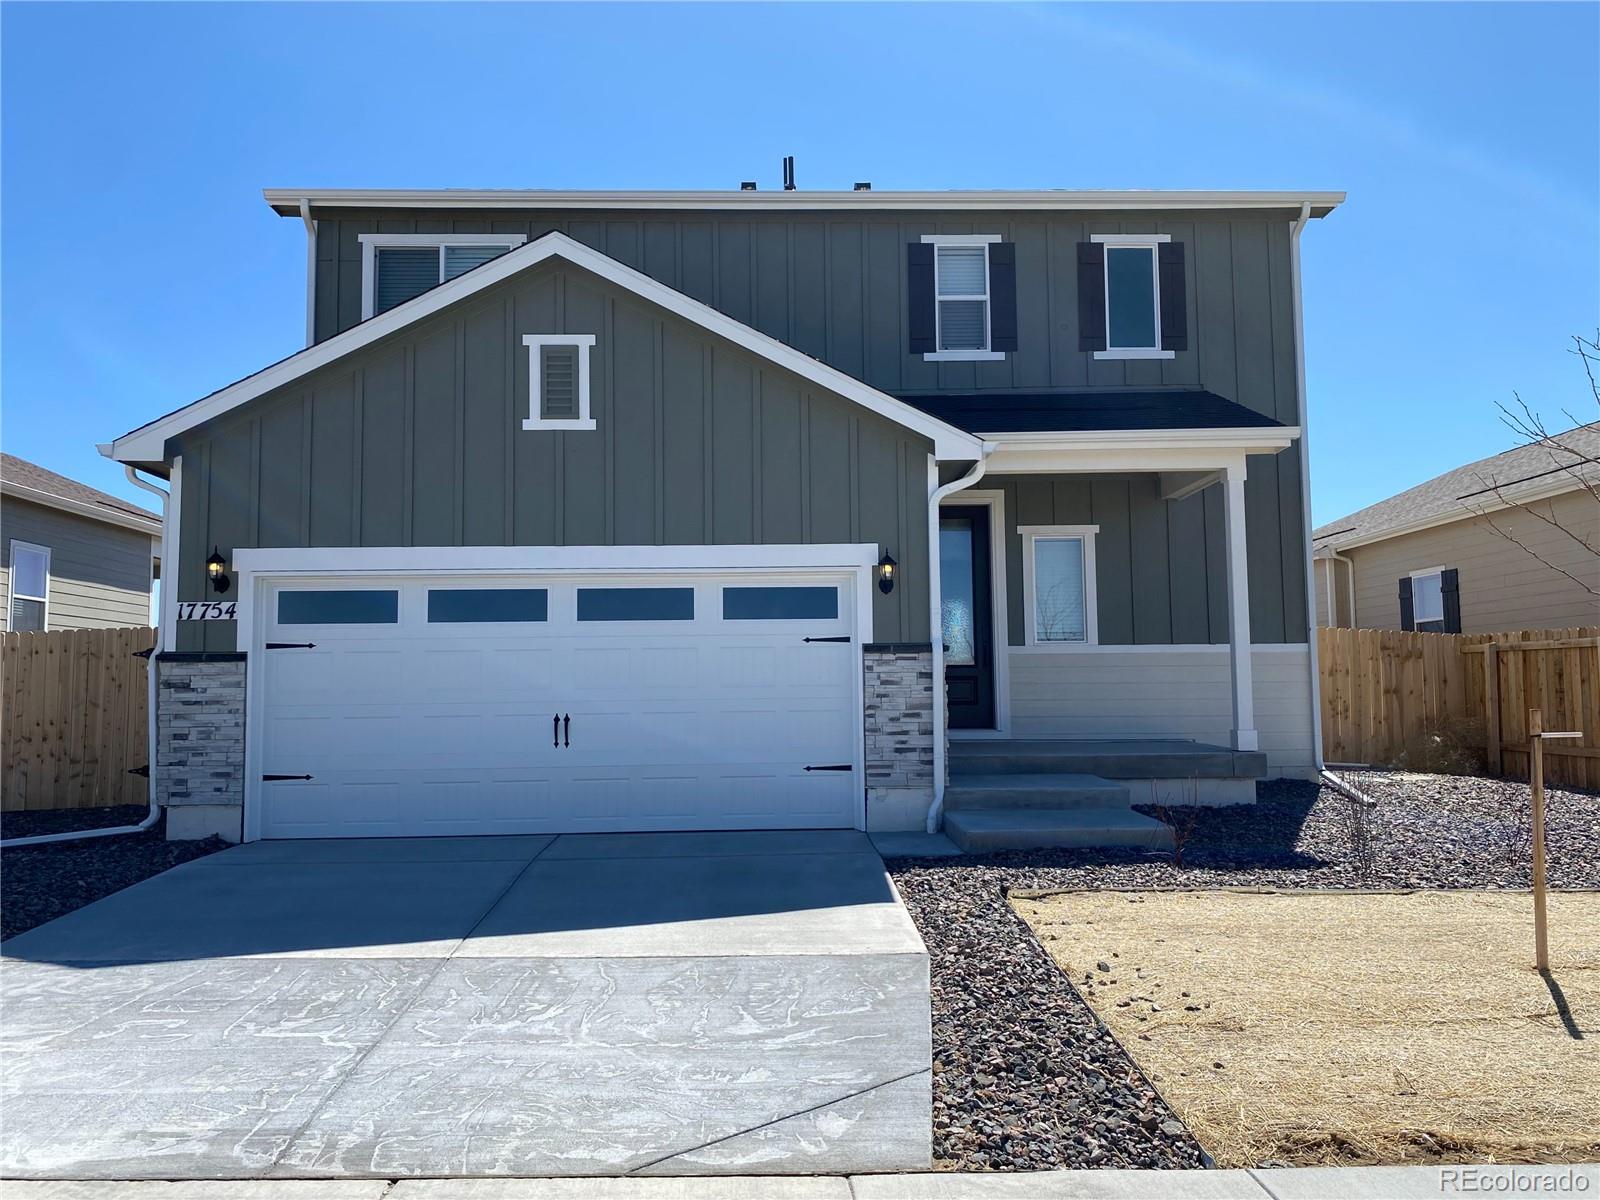 17754 E 94th Drive, commerce city MLS: 1692730 Beds: 3 Baths: 3 Price: $529,900